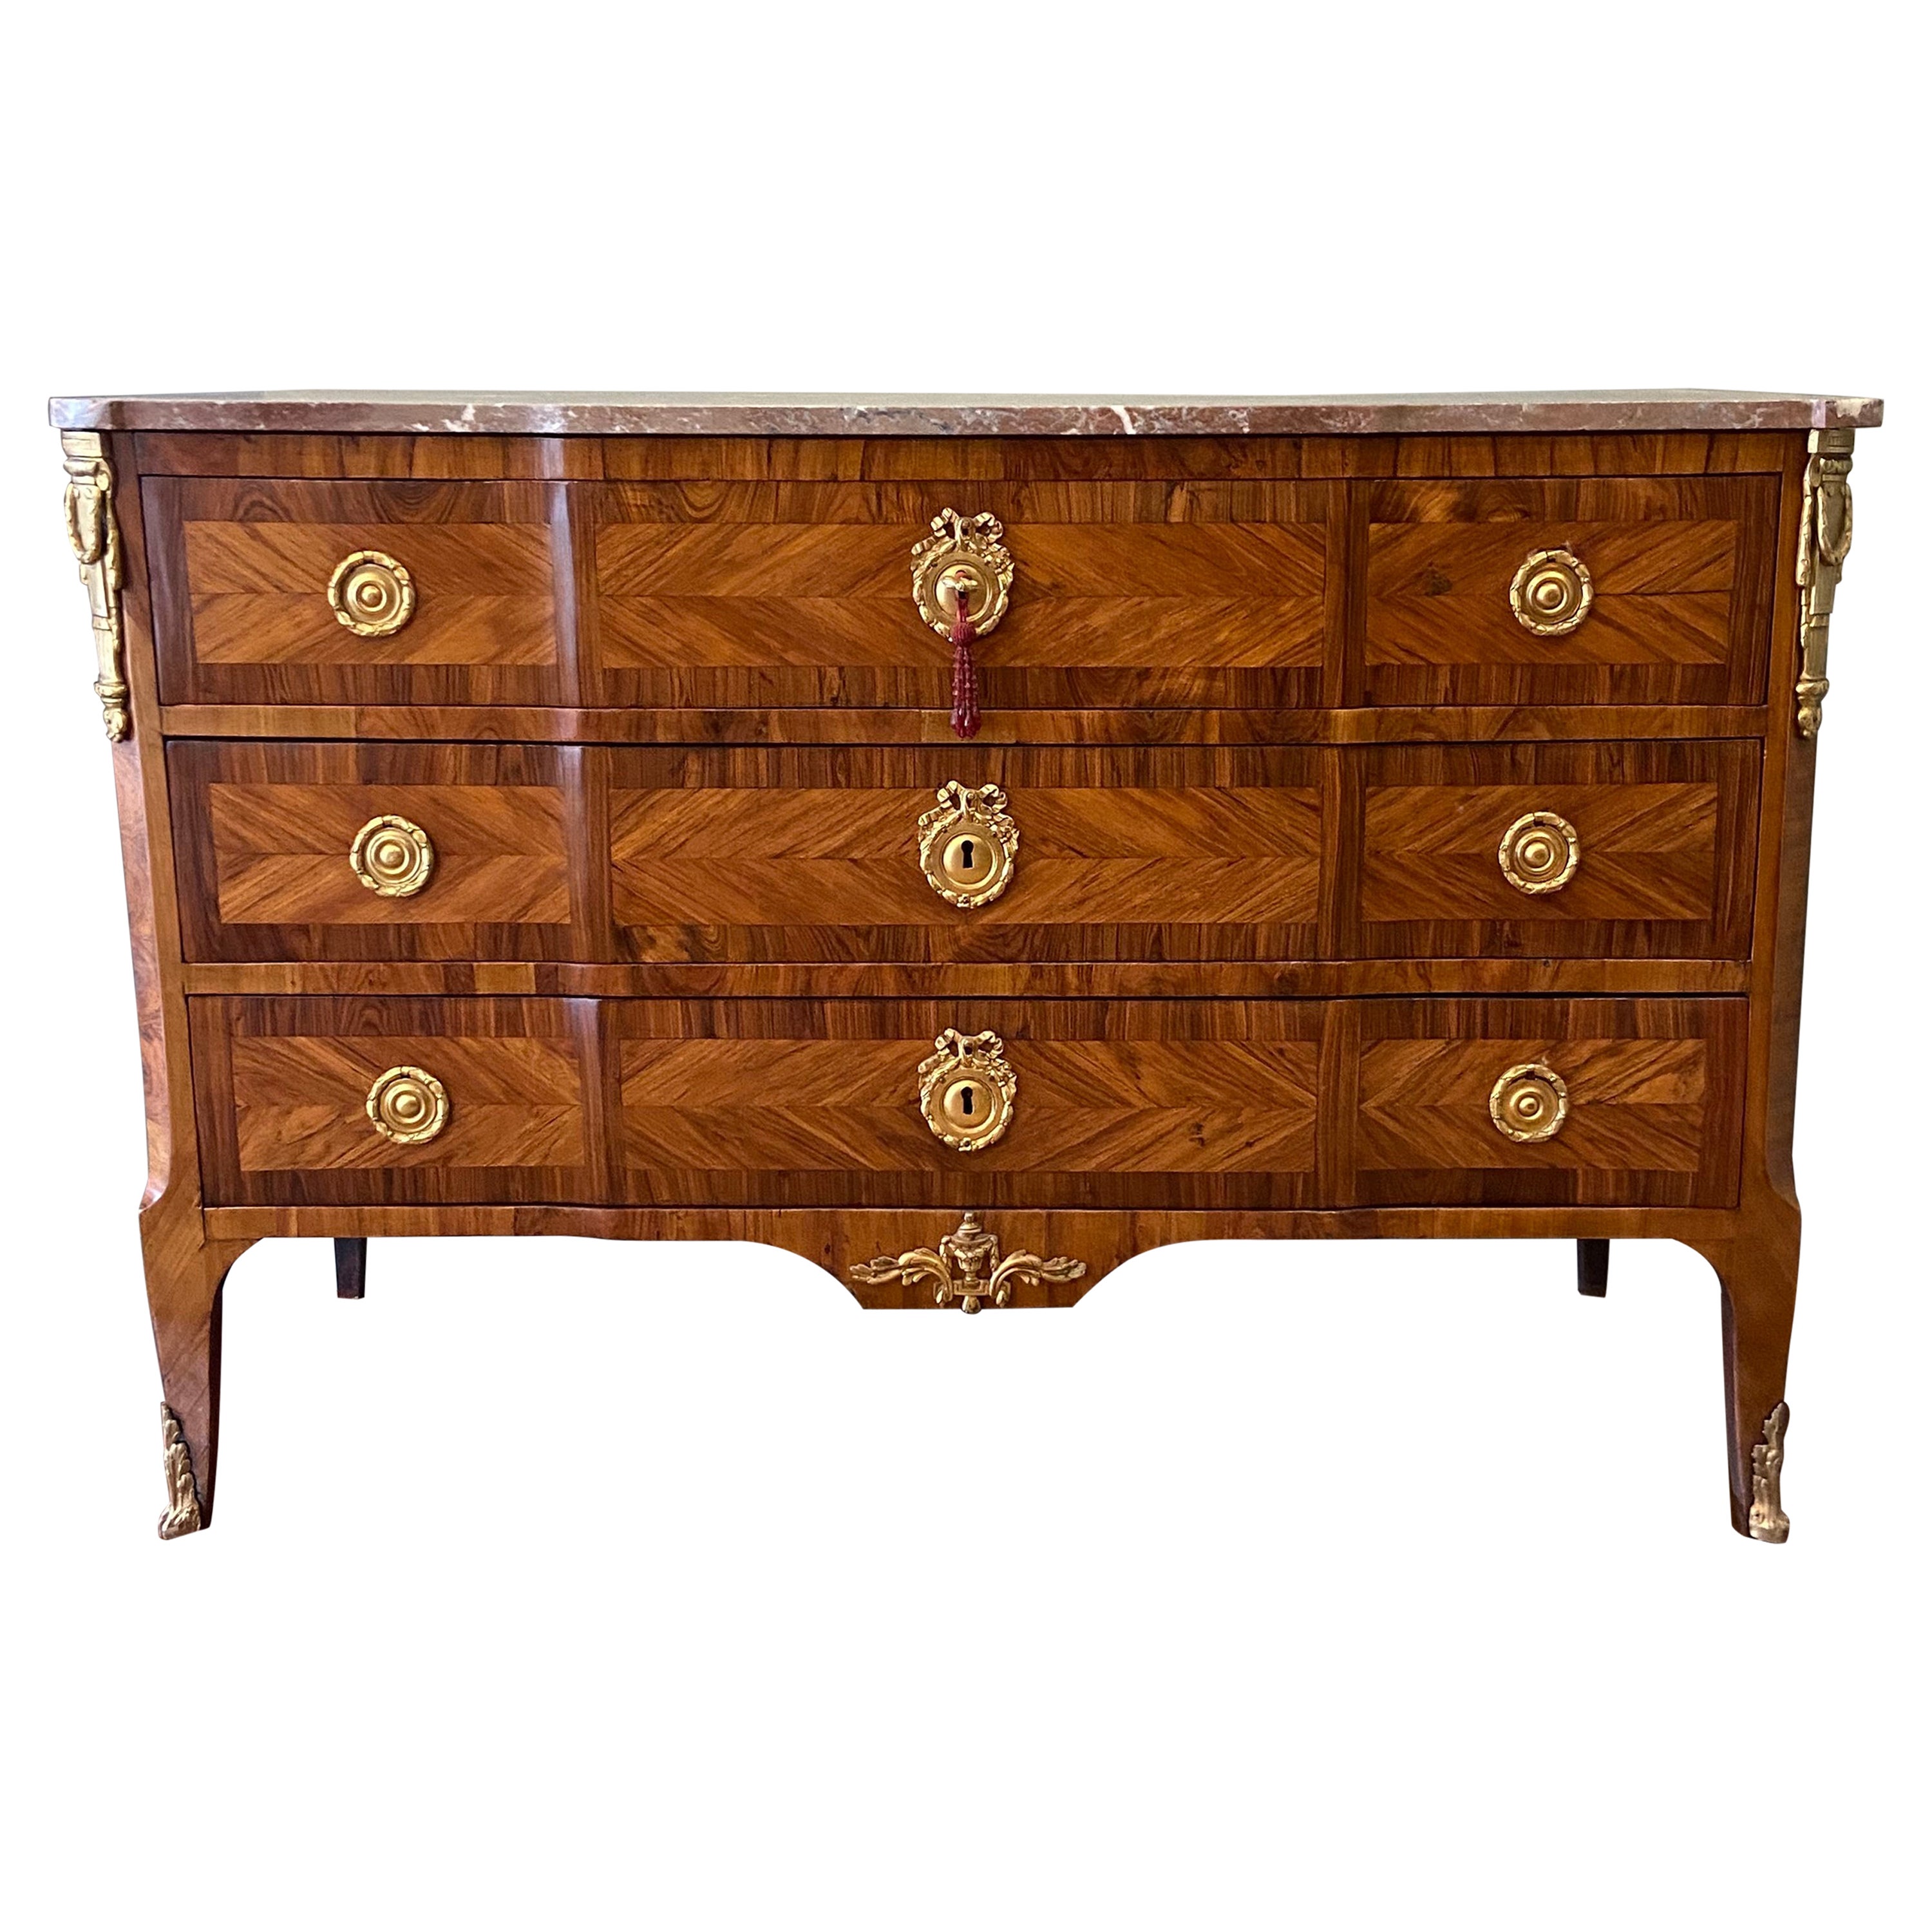 Louis XV Ormolu-Mounted Kingwood and Fruitwood Commode 'Mid 18th Century' For Sale